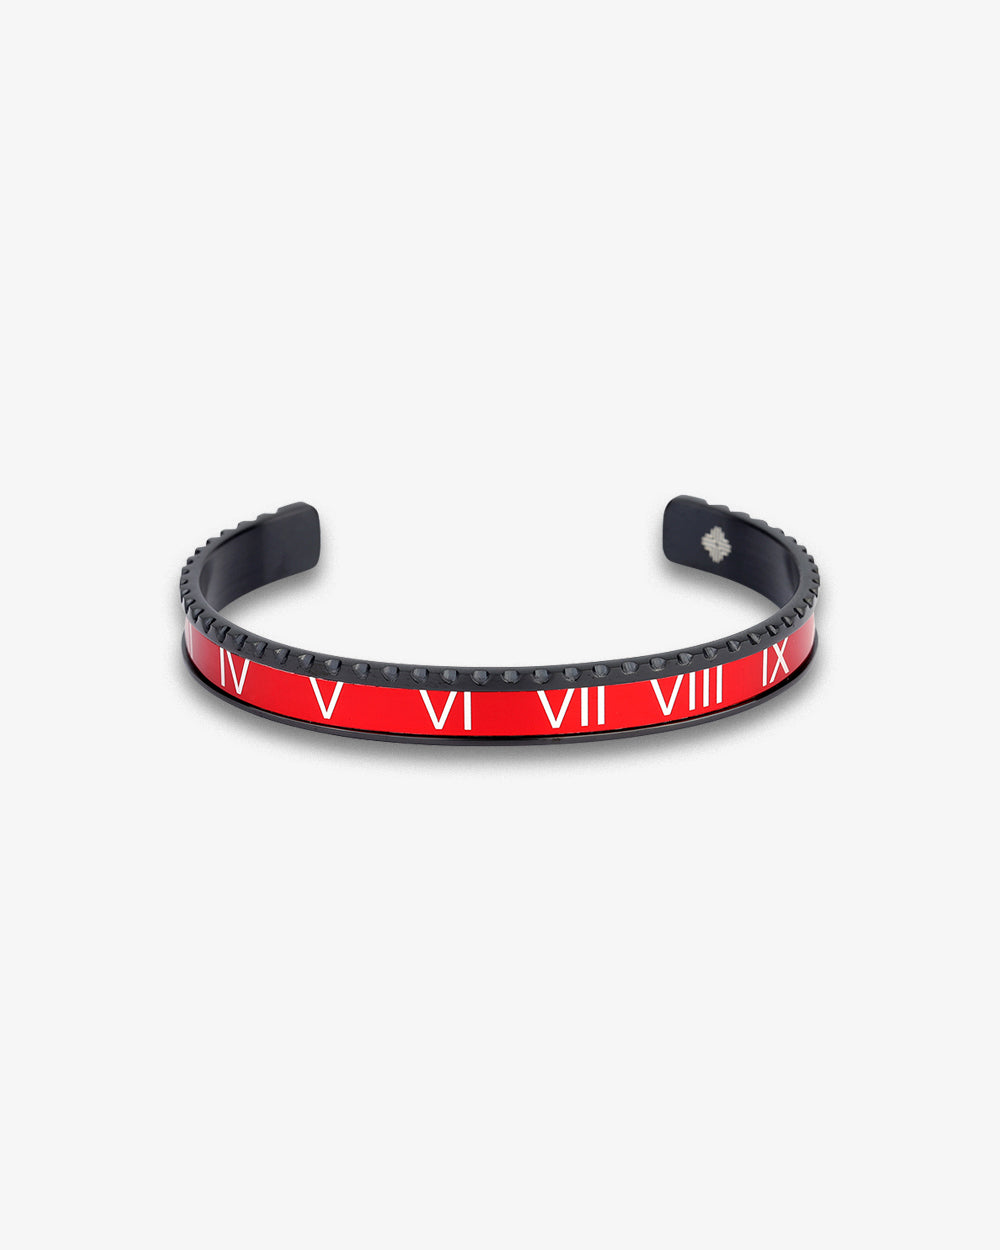 Swiss Concept Classic Roman Numeral Speed Bracelet (Red & Black Gold) - Stainless Steel